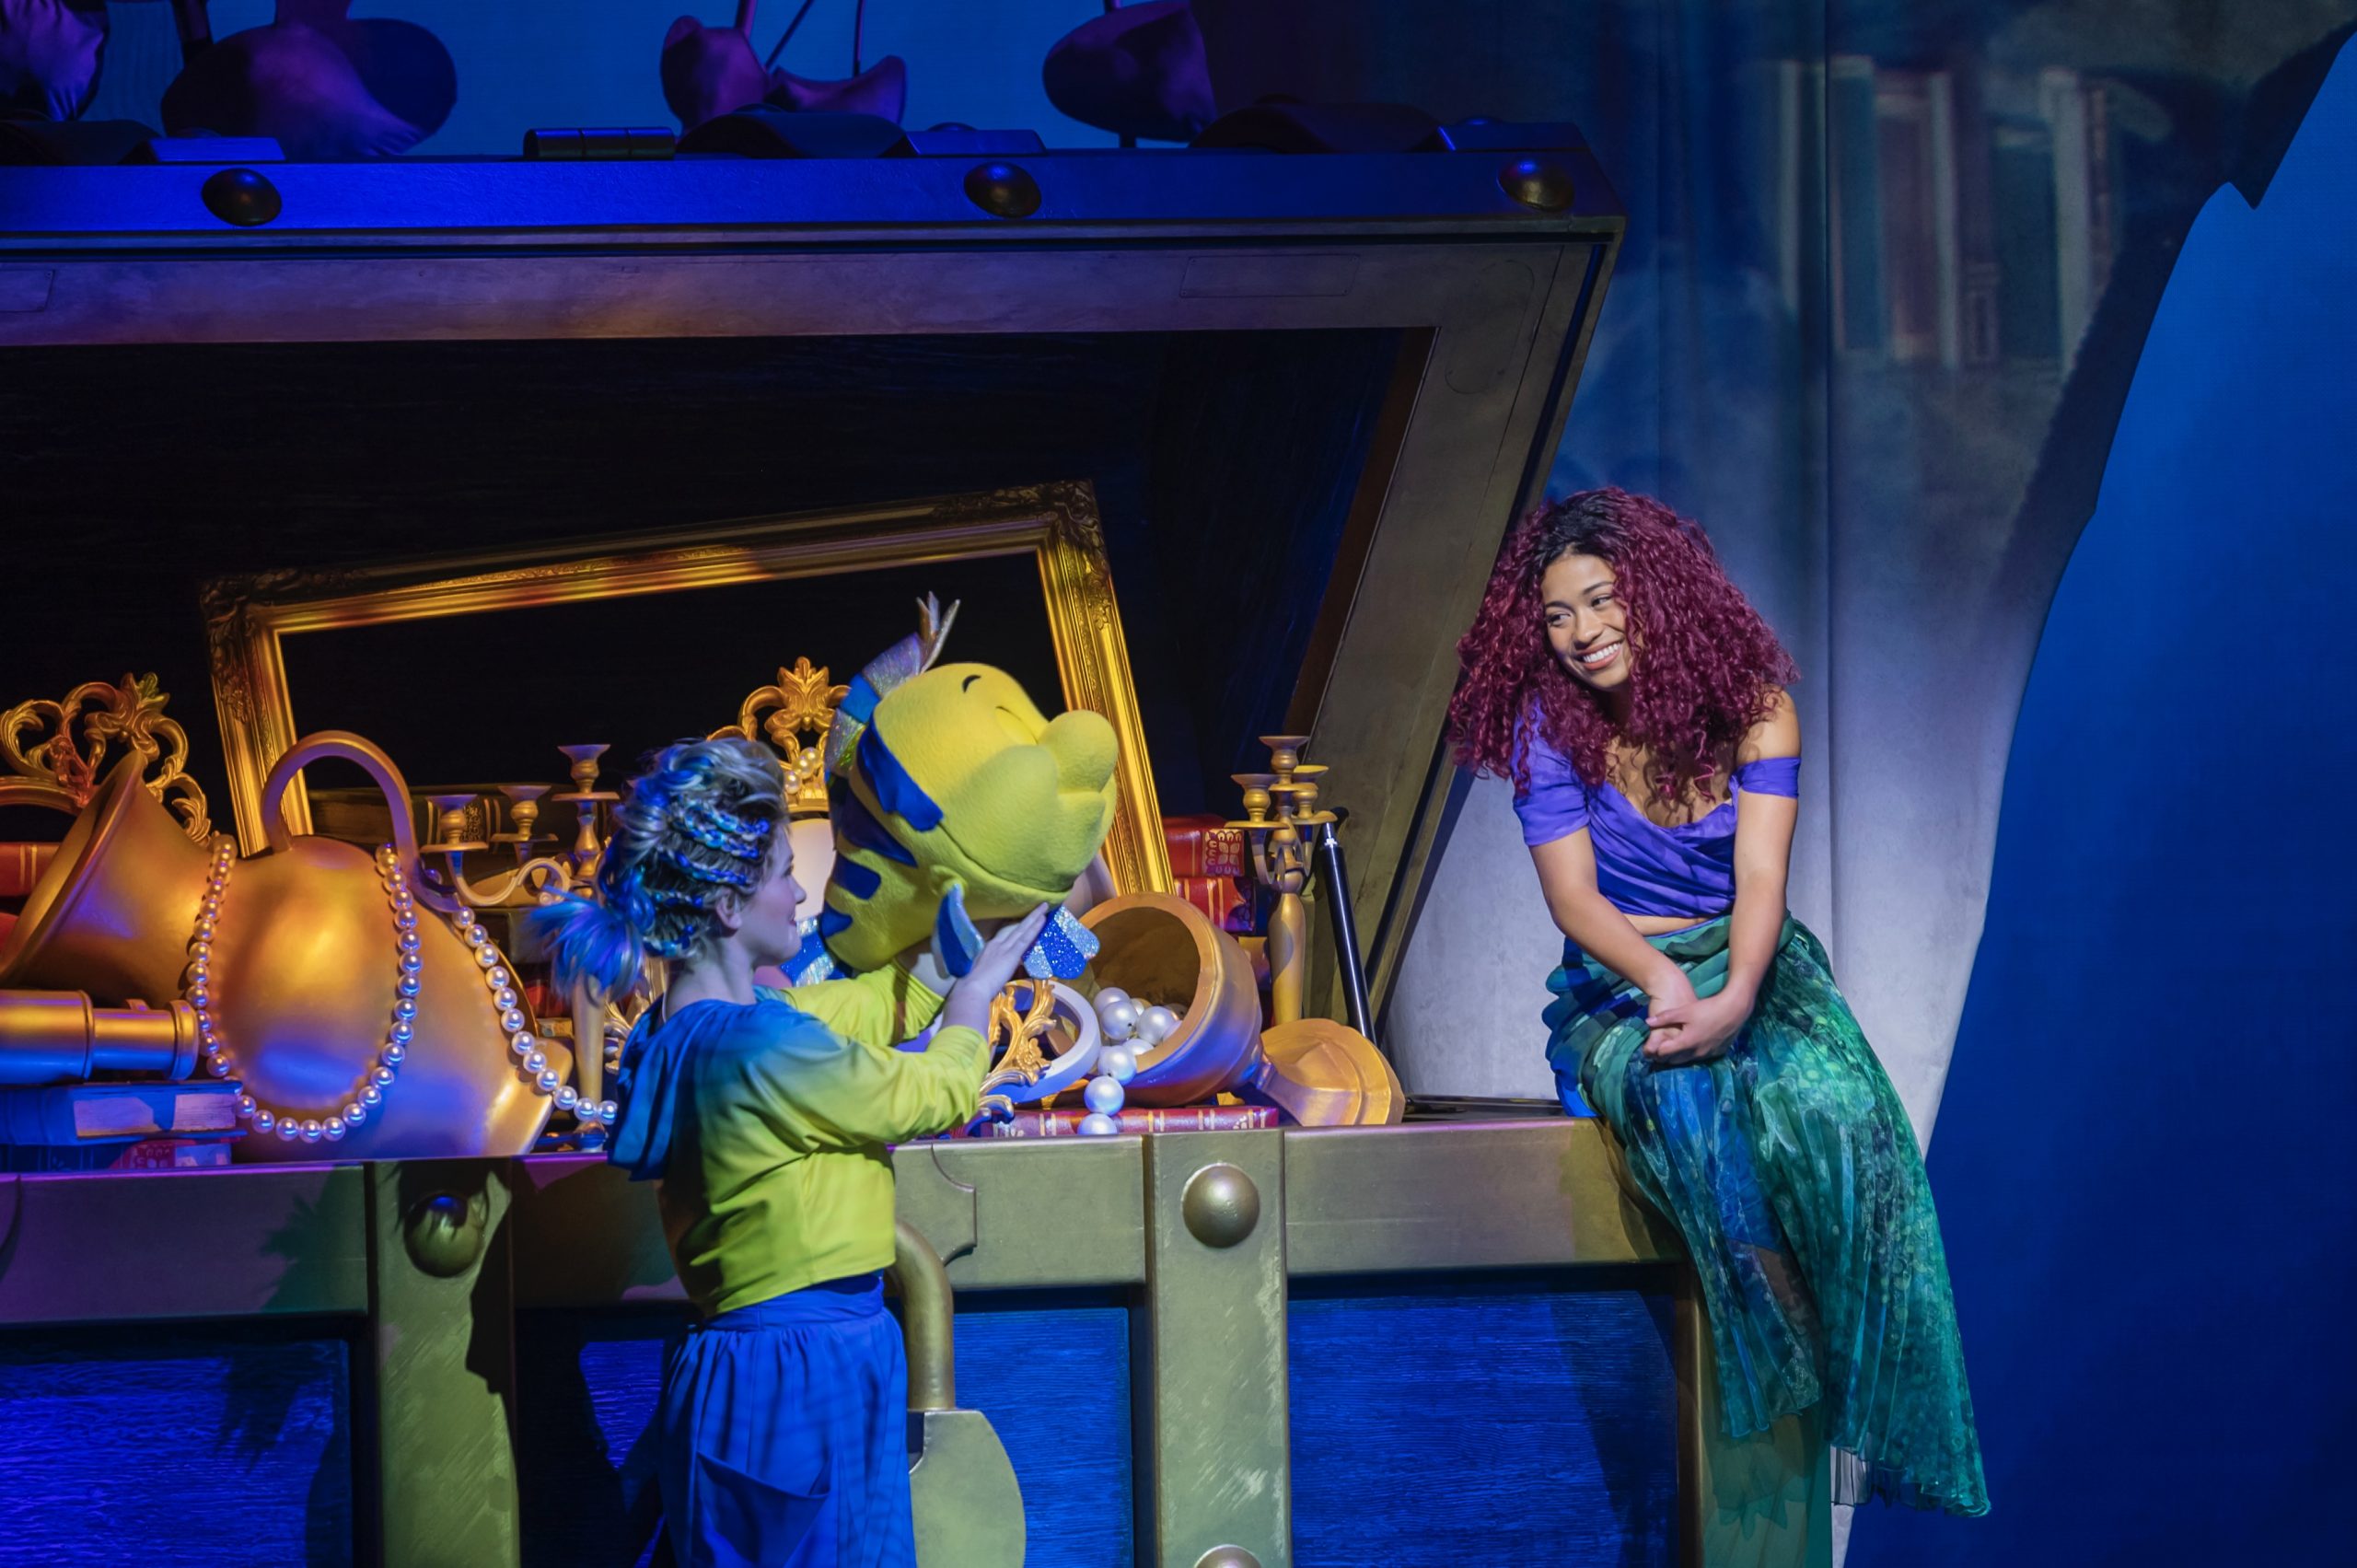 Ariel and Flounder during the theatrical production of The Little Mermaid onboard the Disney Wish cruise ship